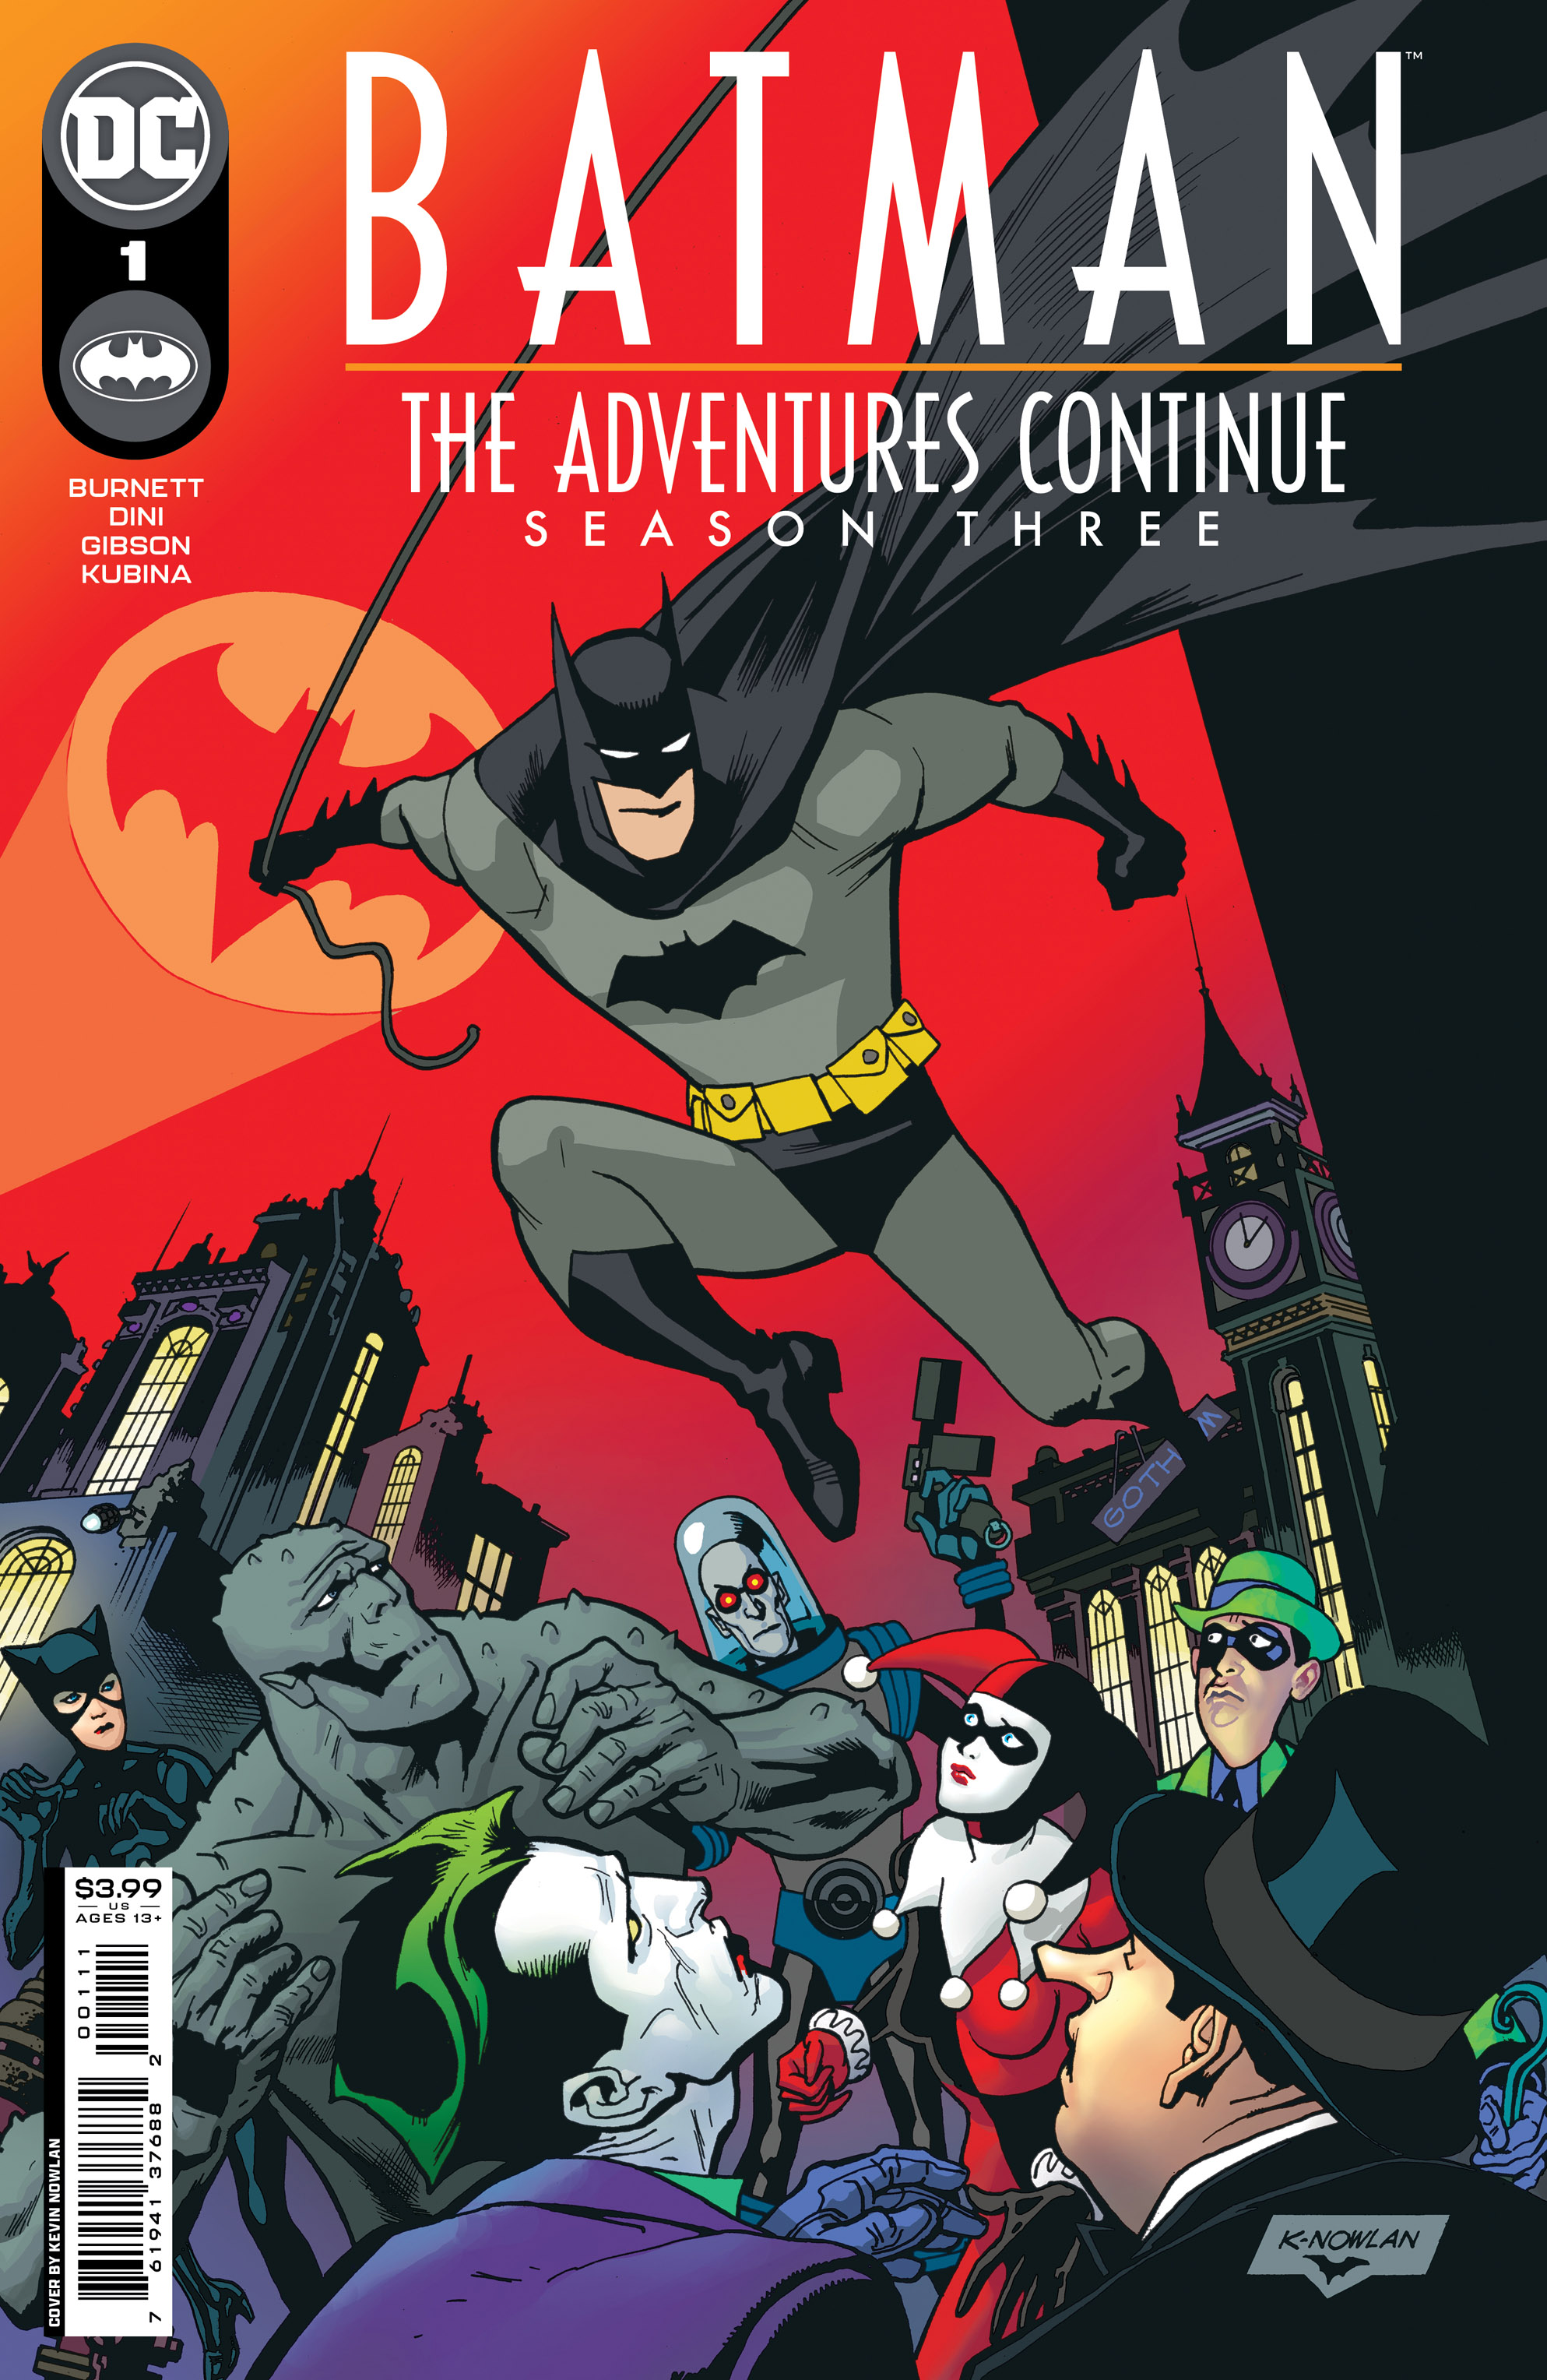 Batman The Adventures Continue Season Three #1 Cover A Kevin Nowlan (Of 7)